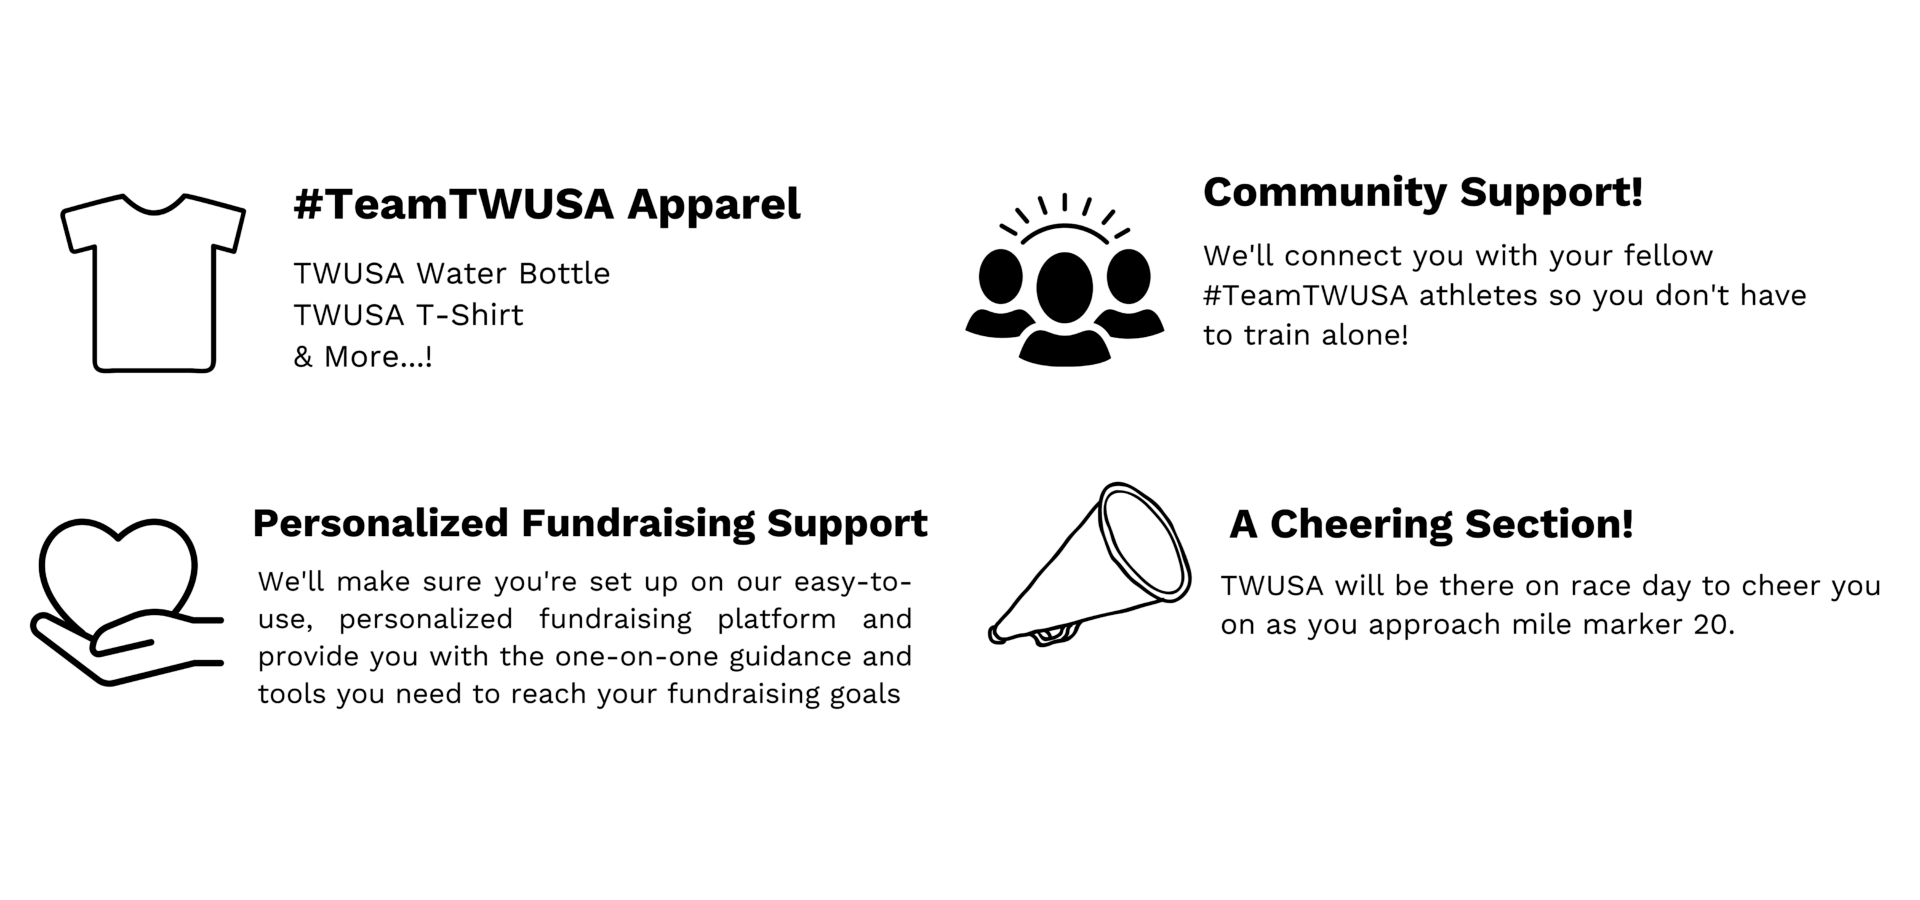 #TeamTWUSA Apparel: TWUSA Water Bottle, TWUSA T-Shirt, & More...!; Personalized Fundraising Support - We'll make sure you're set up on our easy-to-use, personalized fundraising platform and provide you with the one-on-one guidance and tools you need to reach your fundraising goals,; Community Support! We'll connect you with your fellow #TeamTWUSA athletes so you don't have to train alone!; A Cheering Section! TWUSA will be there on race day to cheer you on as you approach mile marker 20.